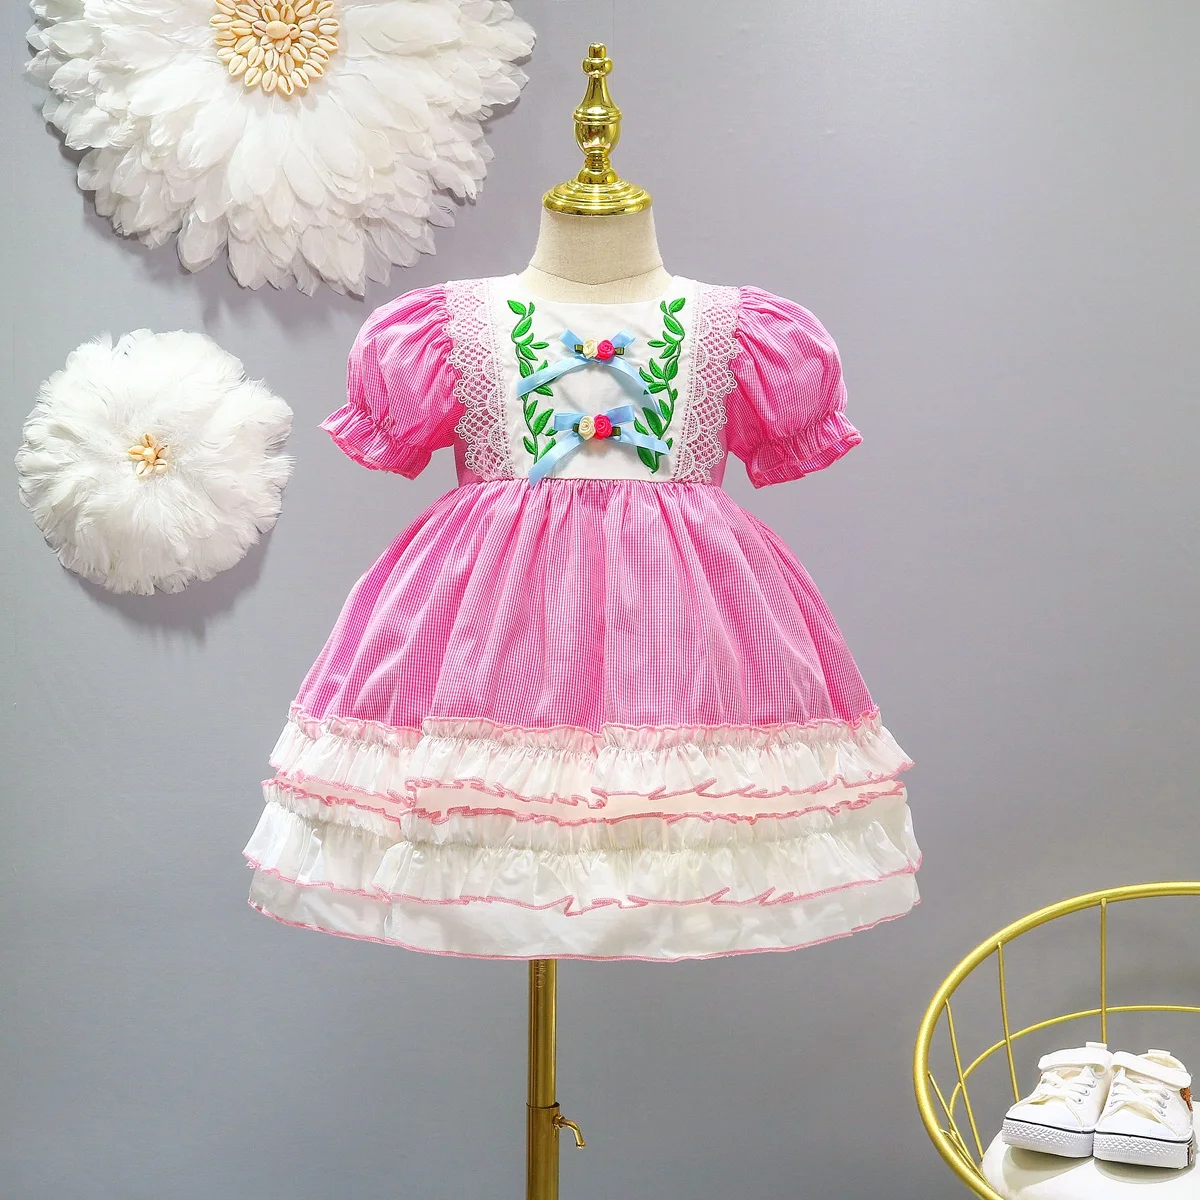 Kids Dress Girls Clothes Lolita Costume Maid Cosplay Lace Ruffles Summer 3-11 Years Party Dresses For Girl Children's Clothing